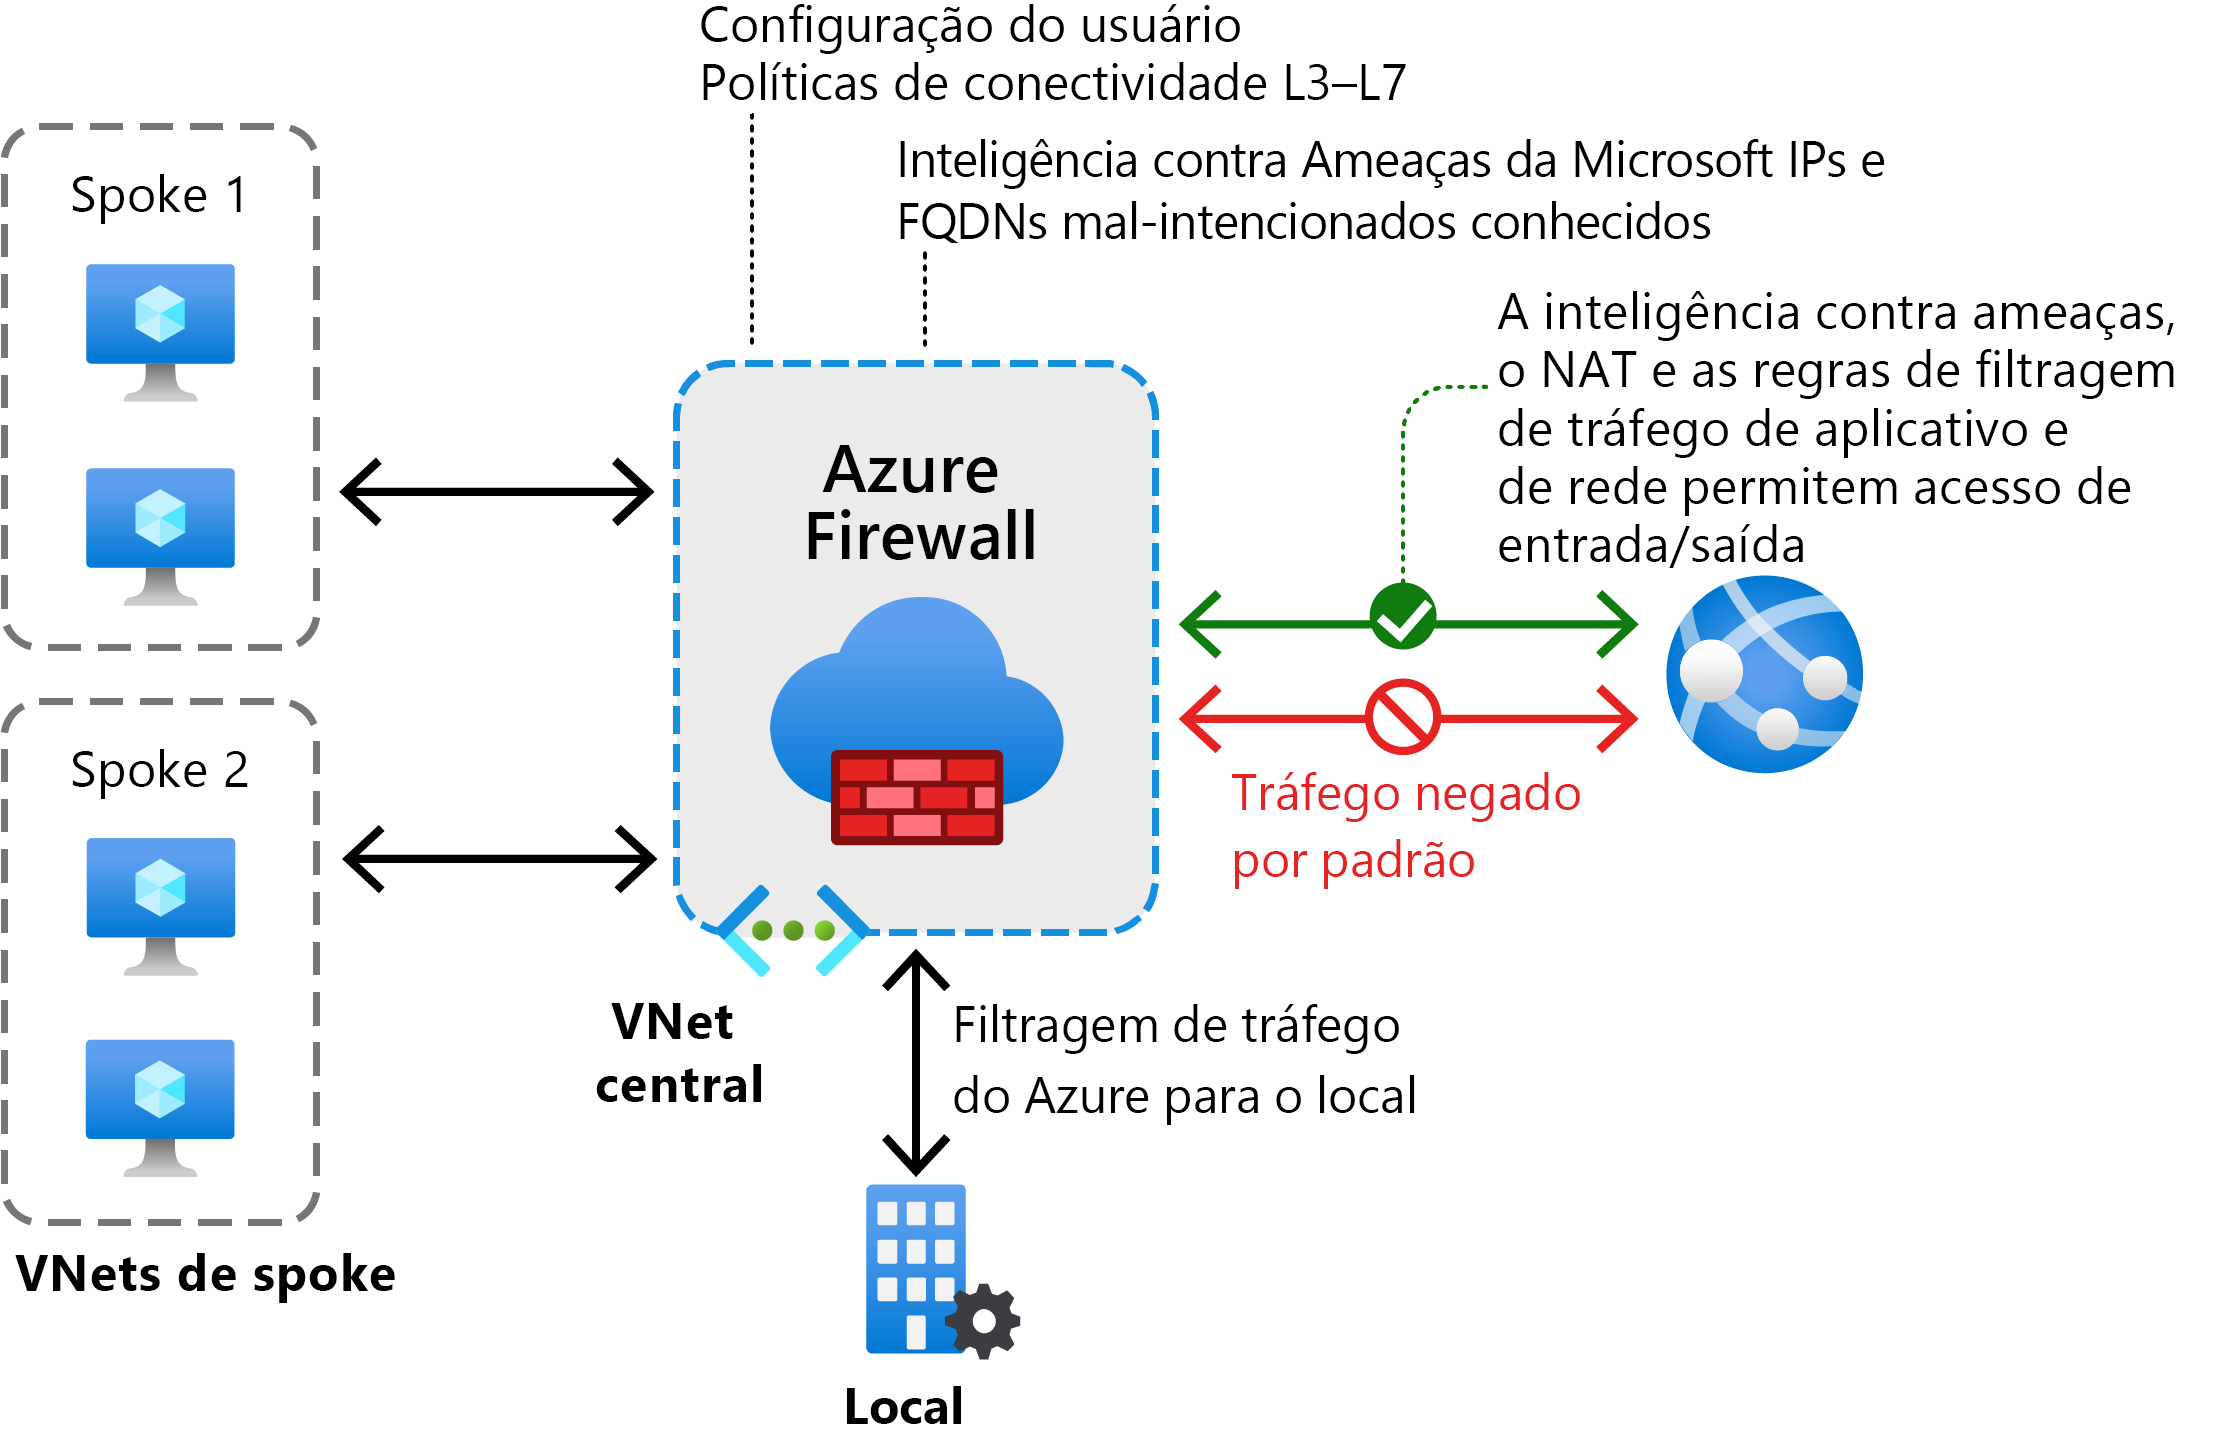 A graphic that displays an Azure Firewall solution. A number of spoke VNets are connected to a Central VNet containing the firewall. This VNet is in turn connected to both an on-premises network and the internet. Traffic is filtered according to different rules between these different environments.